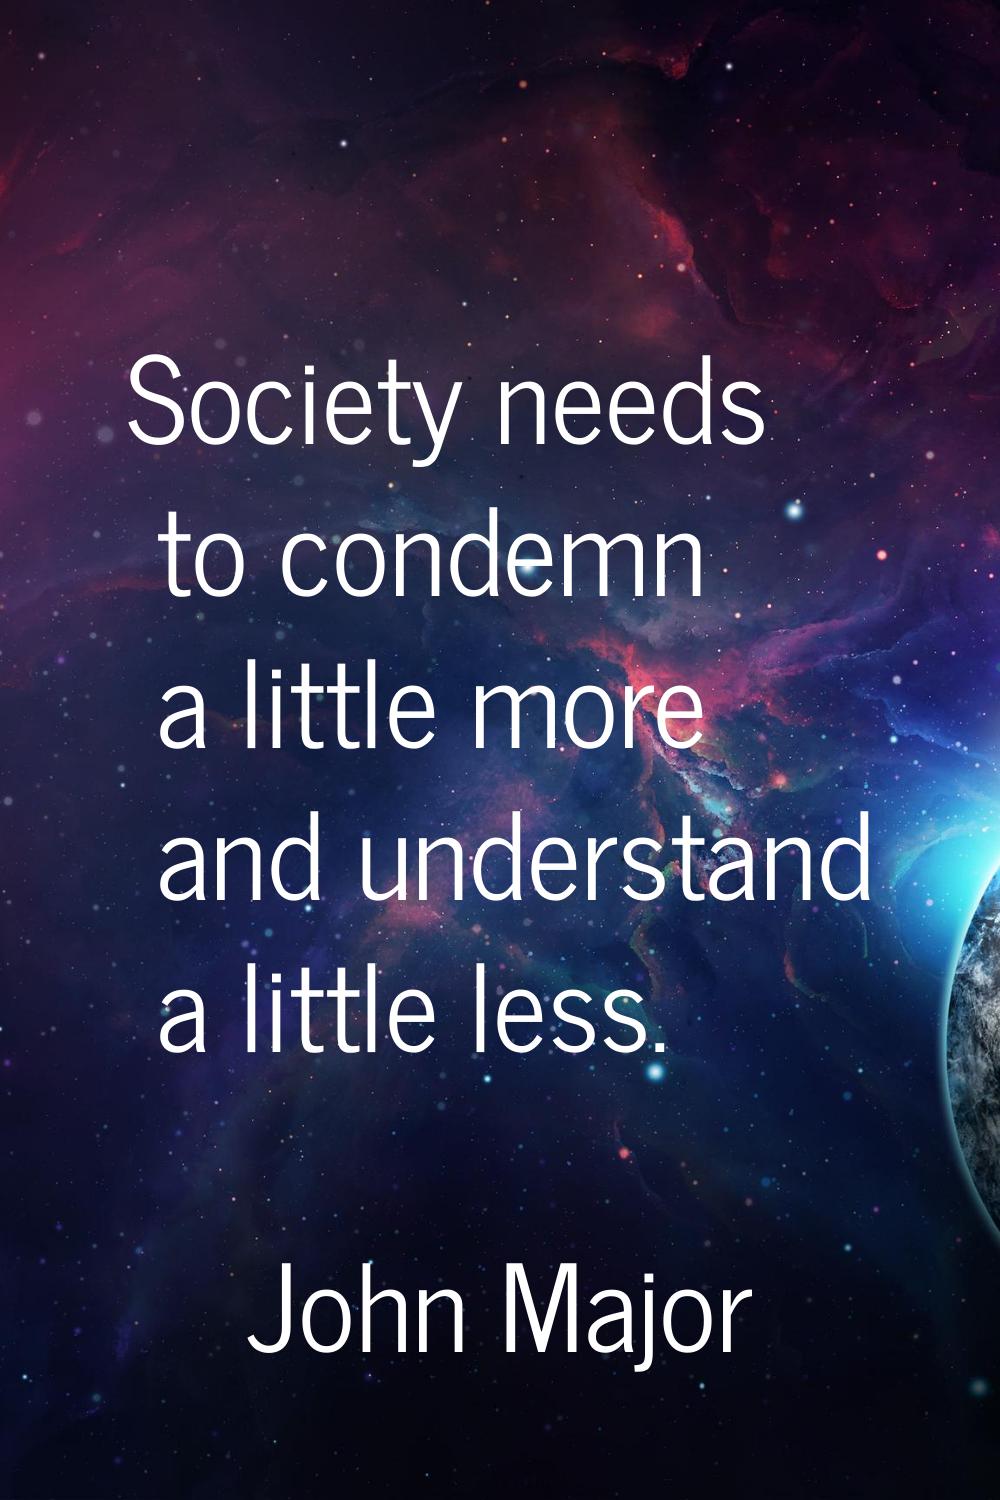 Society needs to condemn a little more and understand a little less.